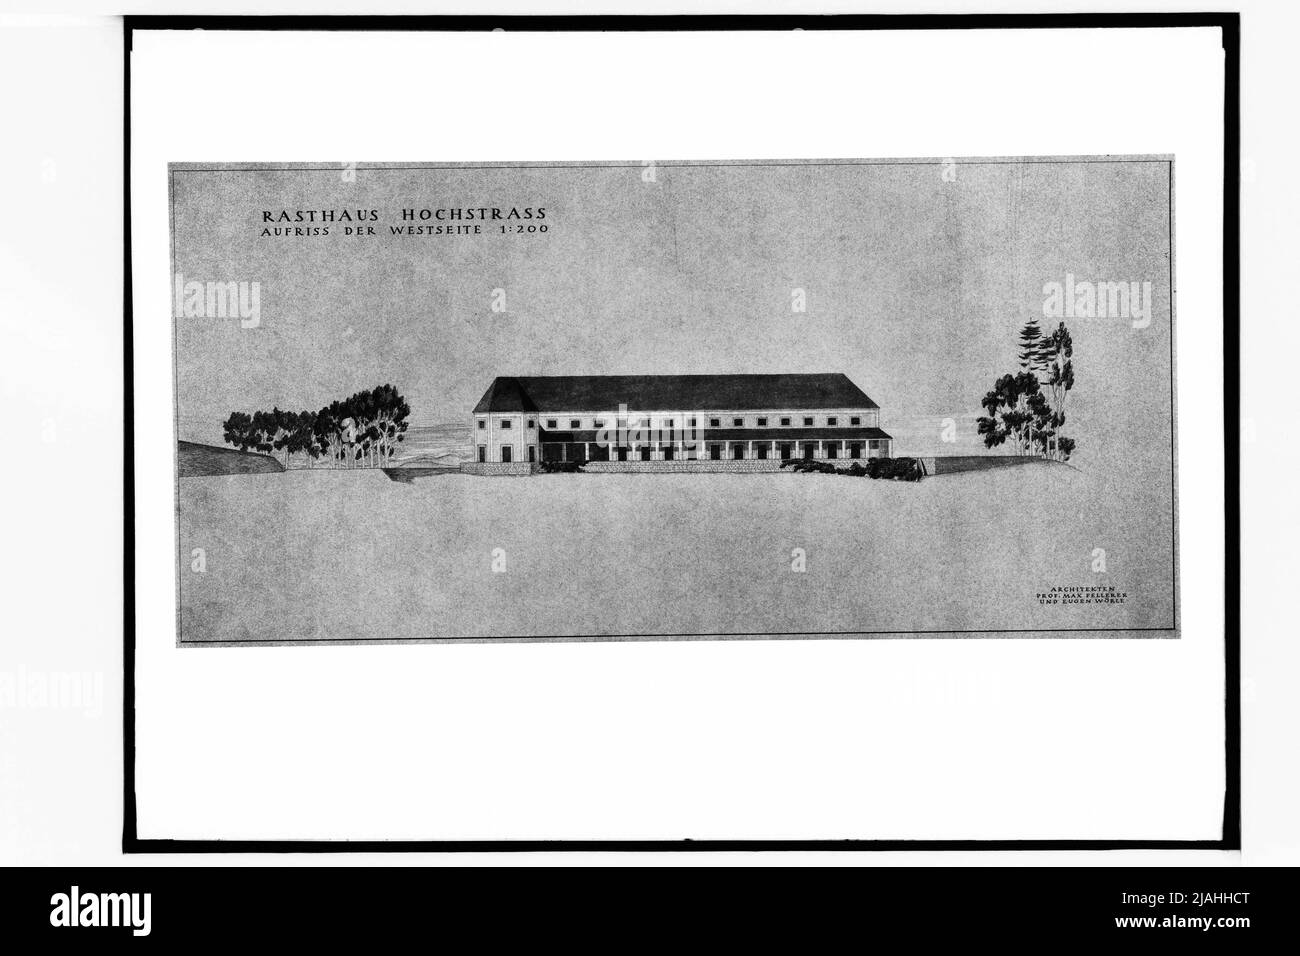 Design for the Rasthaus Hochstraß on the Reichsautobahn (on the sidelines of the west side) Stock Photo